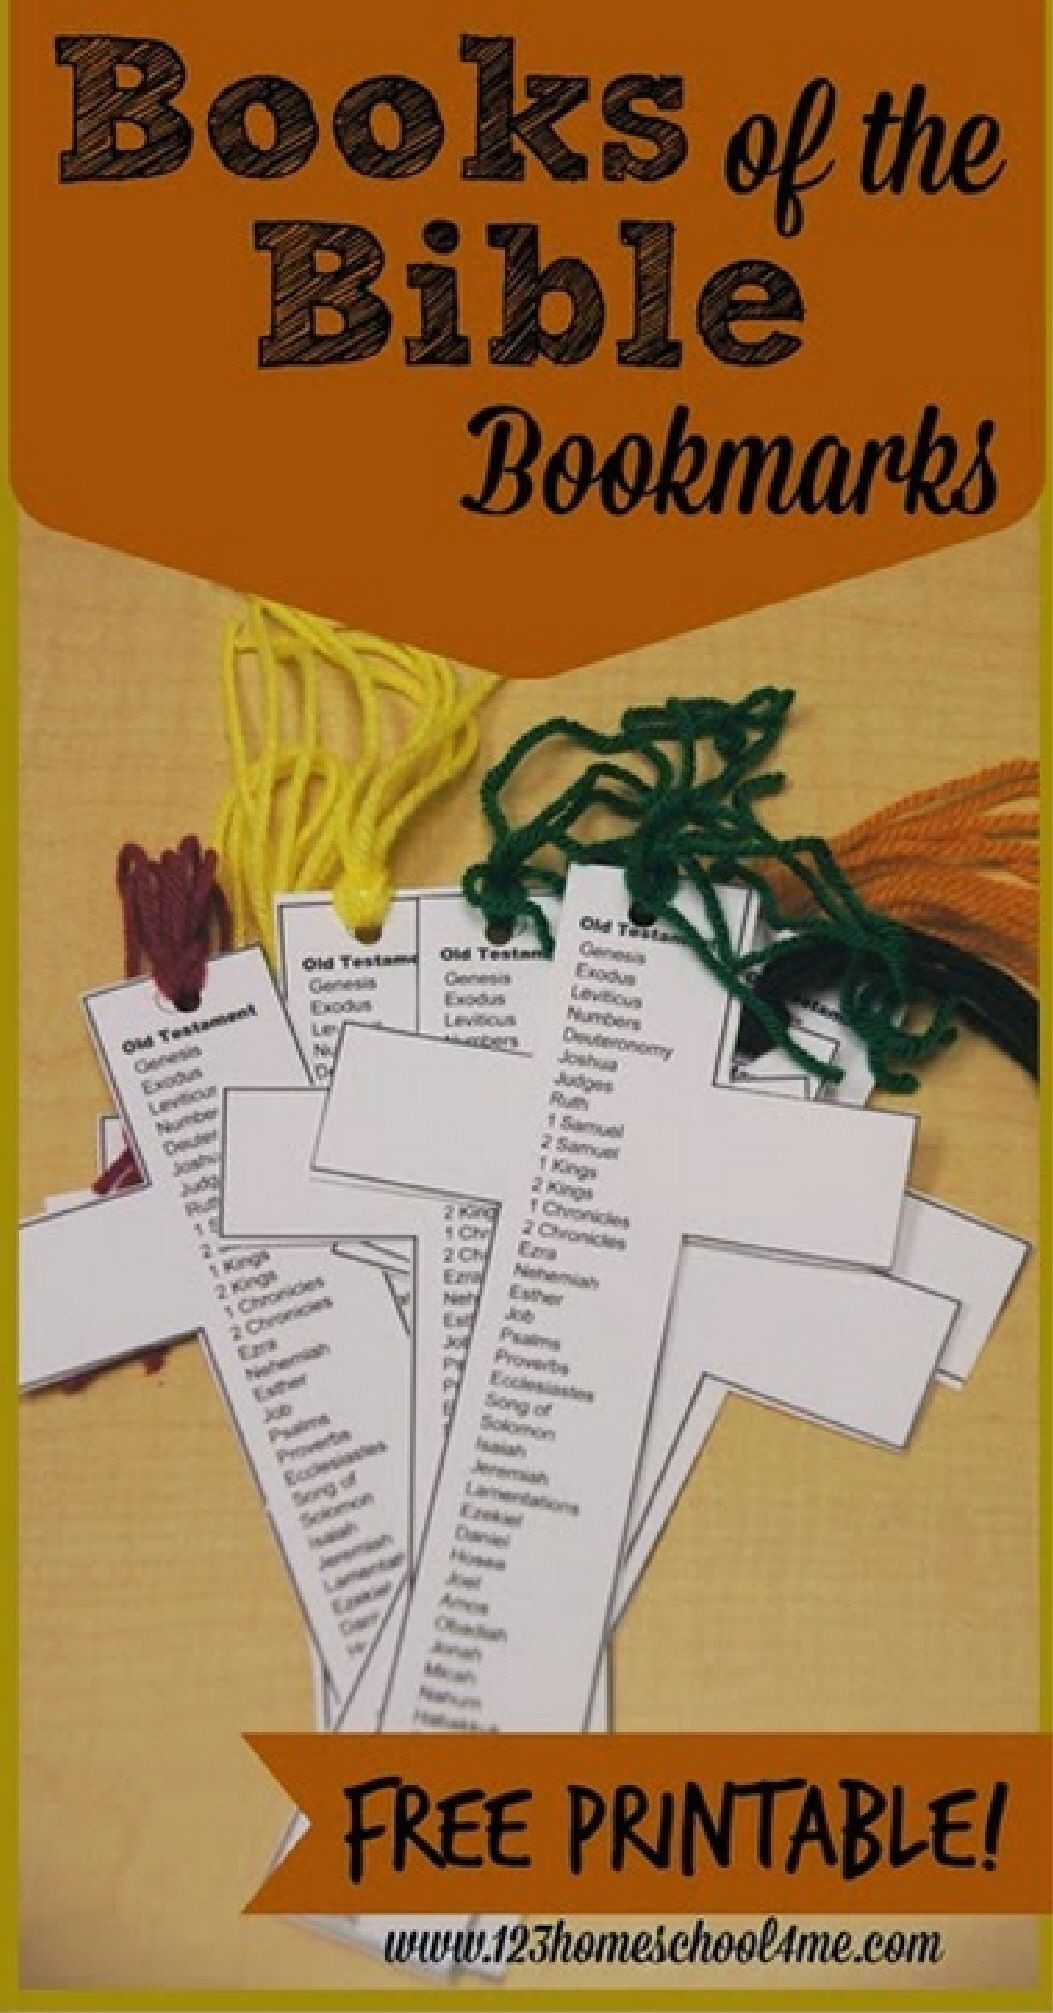 Kids Bible Crafts
 Free Books of the Bible Bookmark